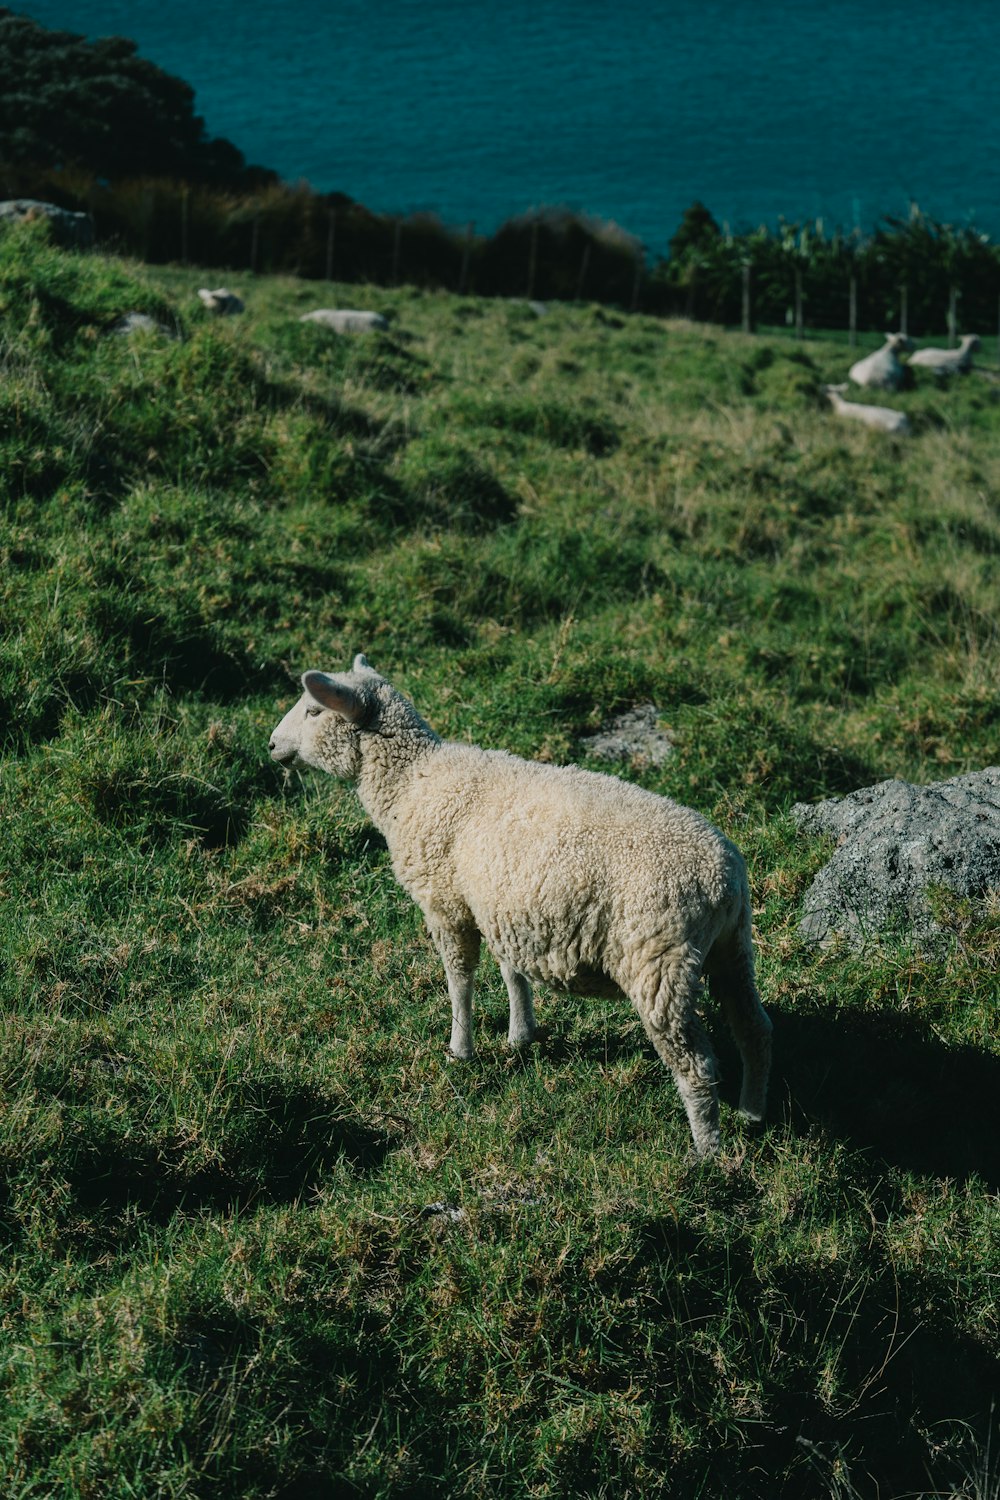 a sheep standing in a grassy field next to a body of water